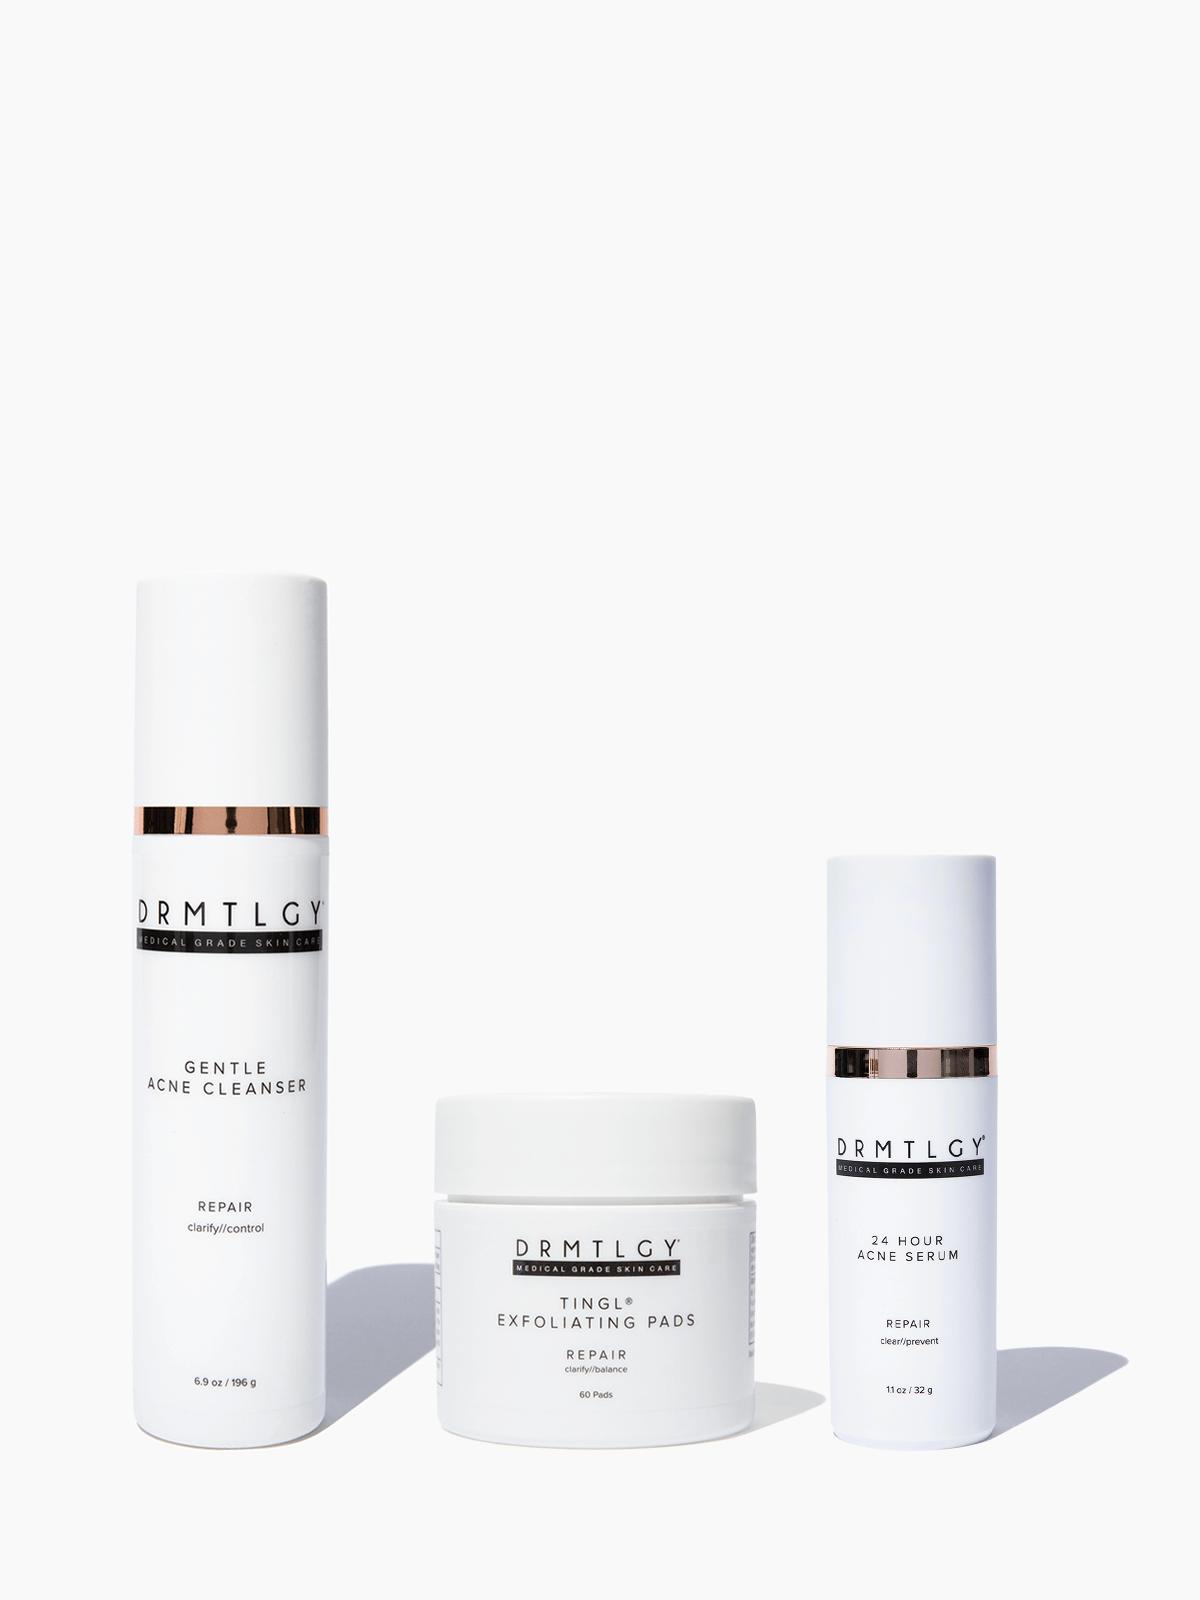 DRMTLGY Comprehensive Acne System *20% off code "ZIONK" *